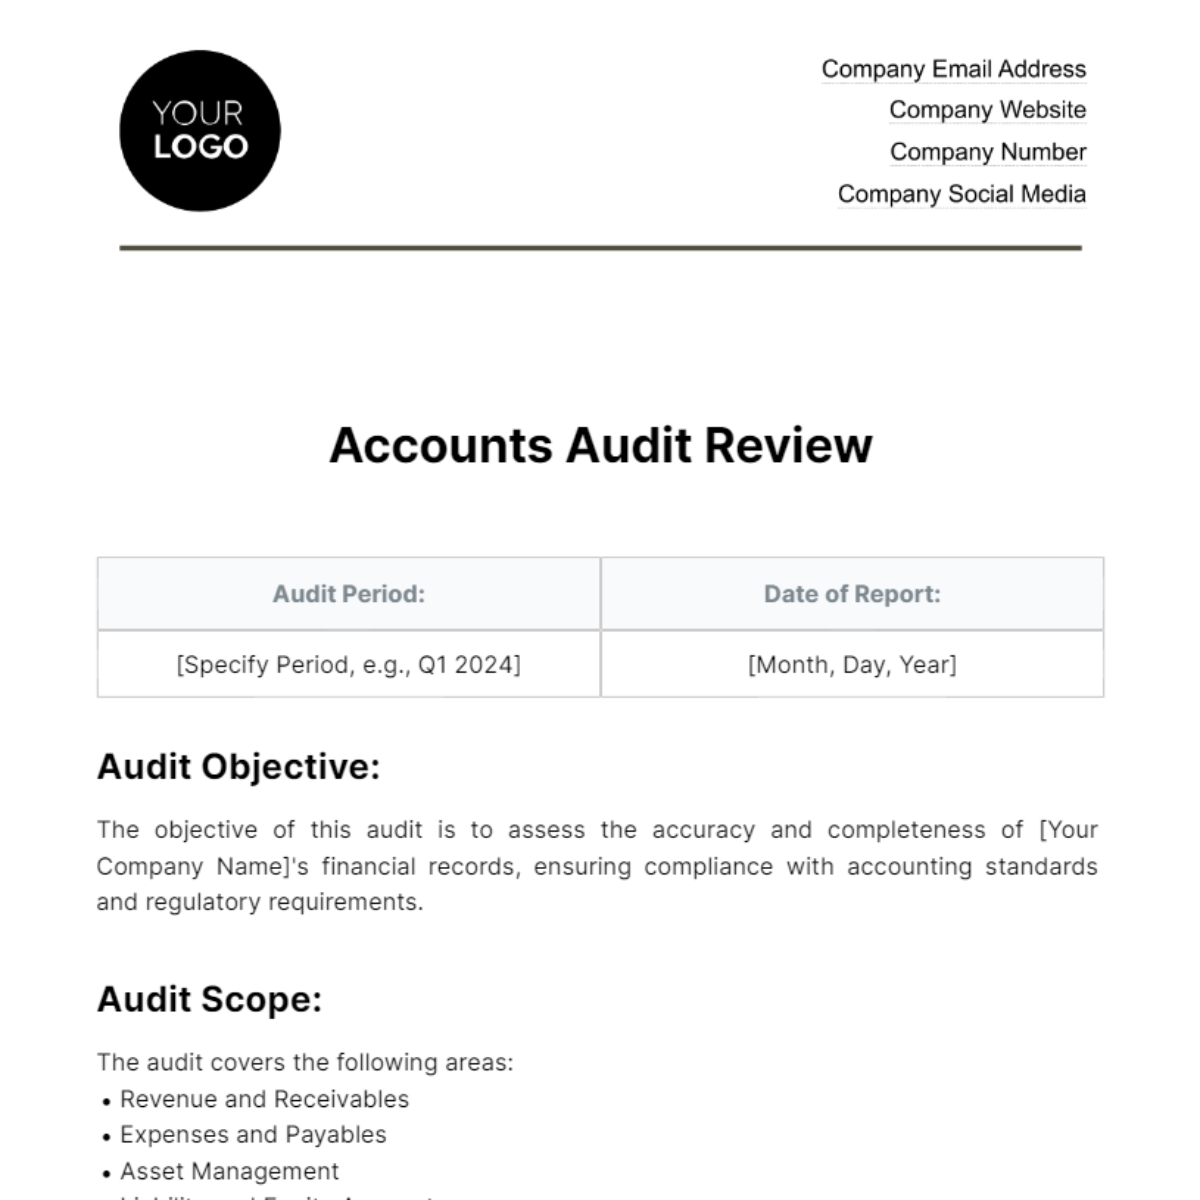 Free Accounts Audit Review Template